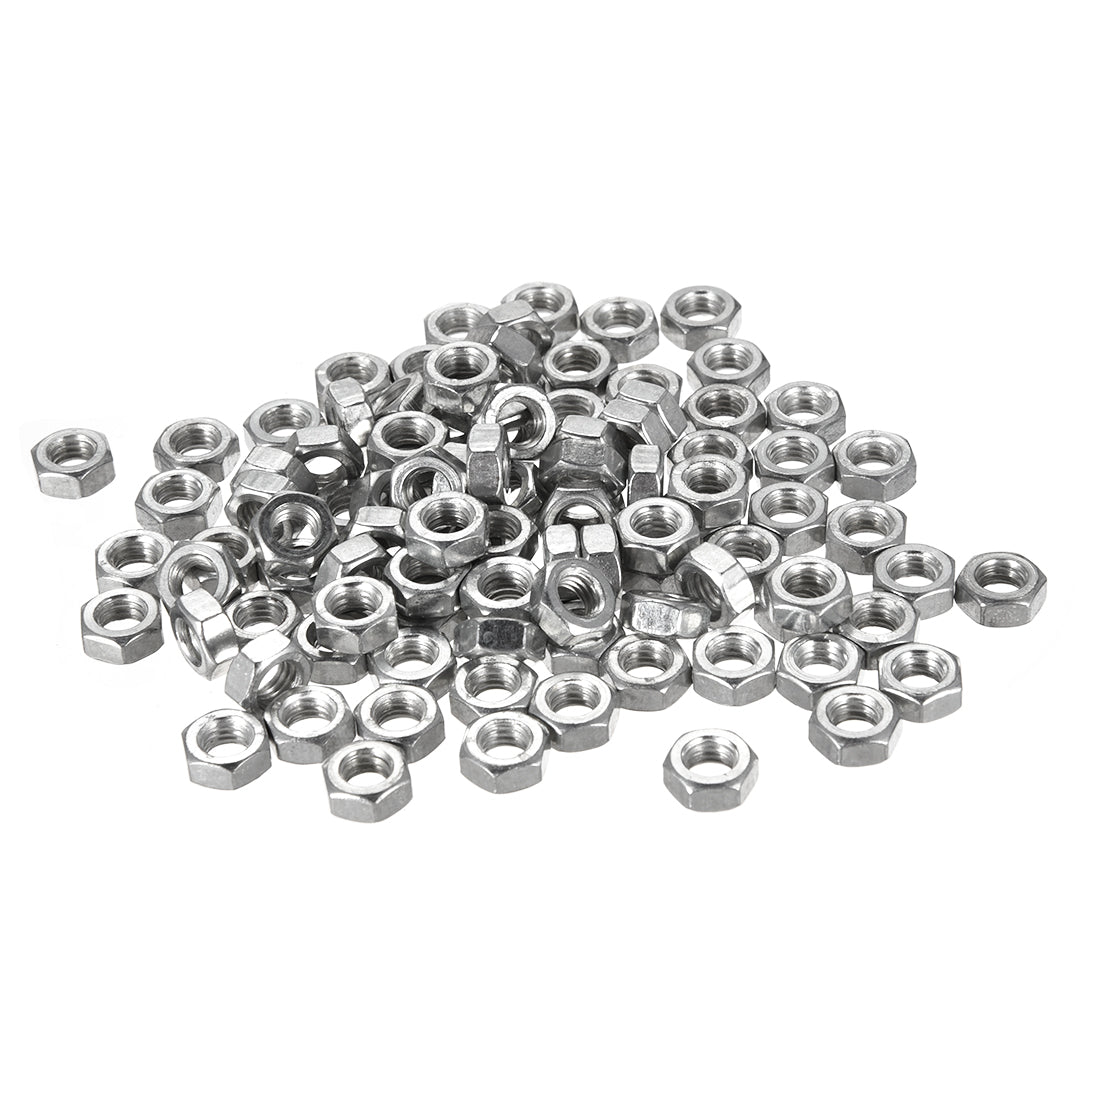 uxcell Uxcell Nickel Plating Metric Carbon Steel Hexagon Hex Nut Silver Tone 100pcs